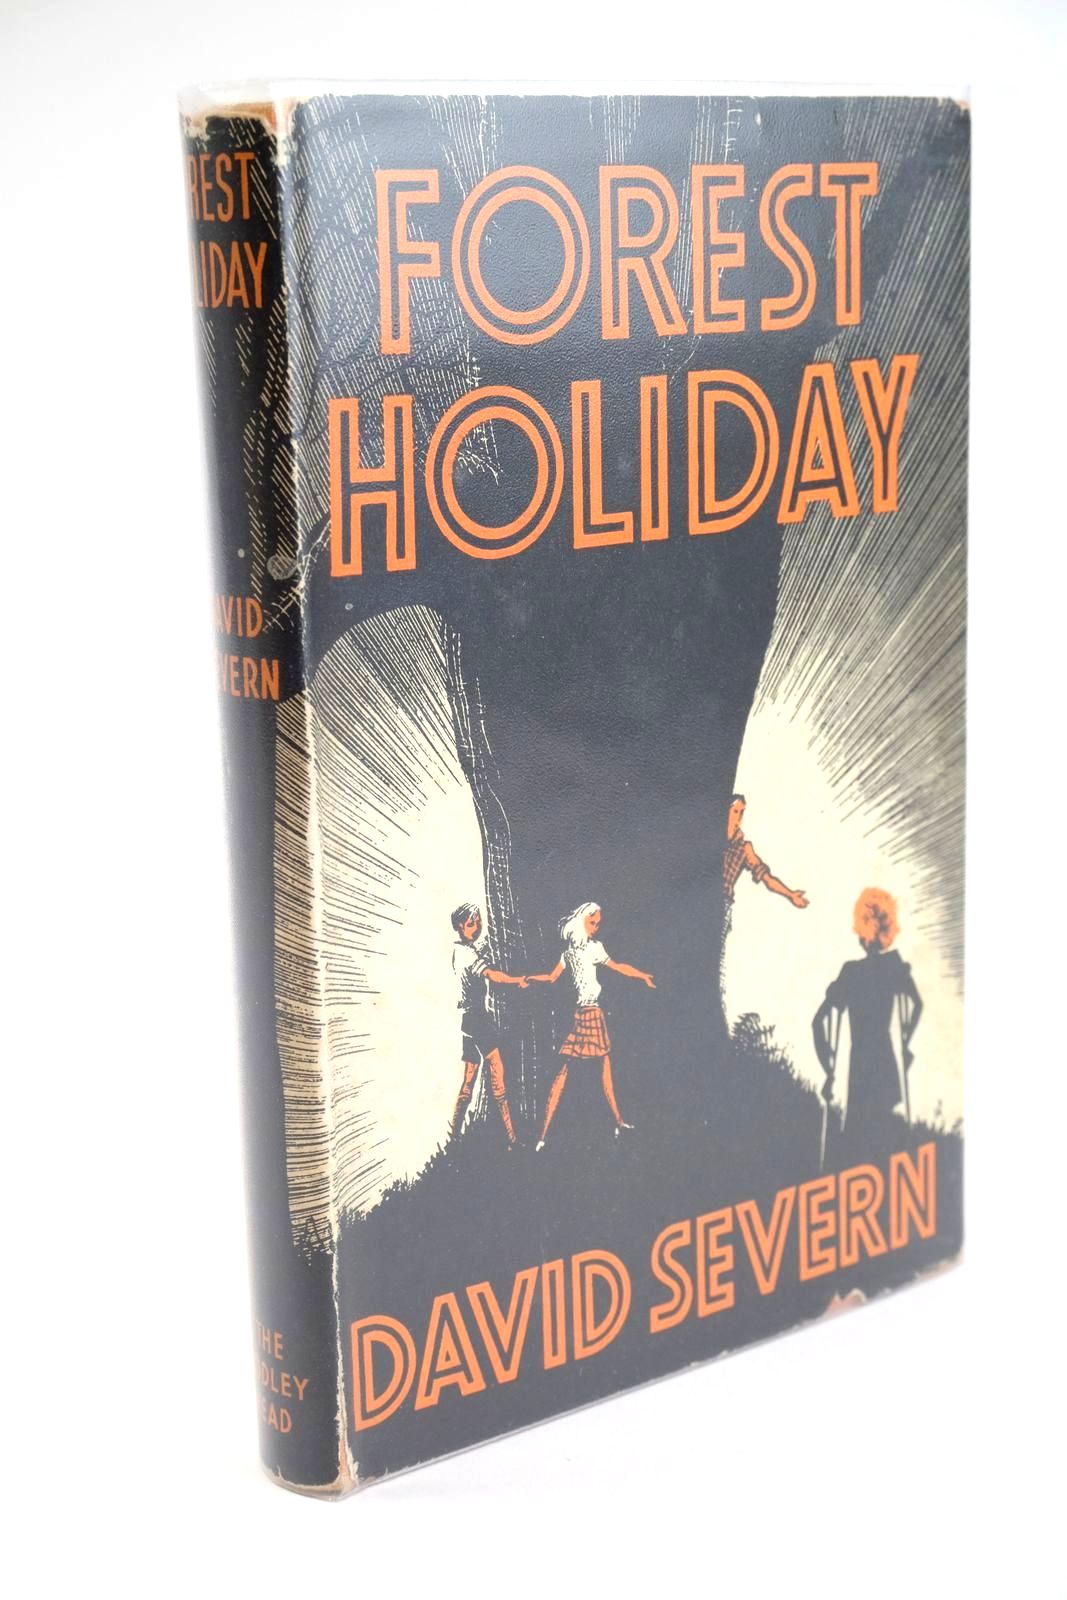 Photo of FOREST HOLIDAY written by Severn, David illustrated by Kiddell-Monroe, Joan published by John Lane The Bodley Head Limited (STOCK CODE: 1328075)  for sale by Stella & Rose's Books